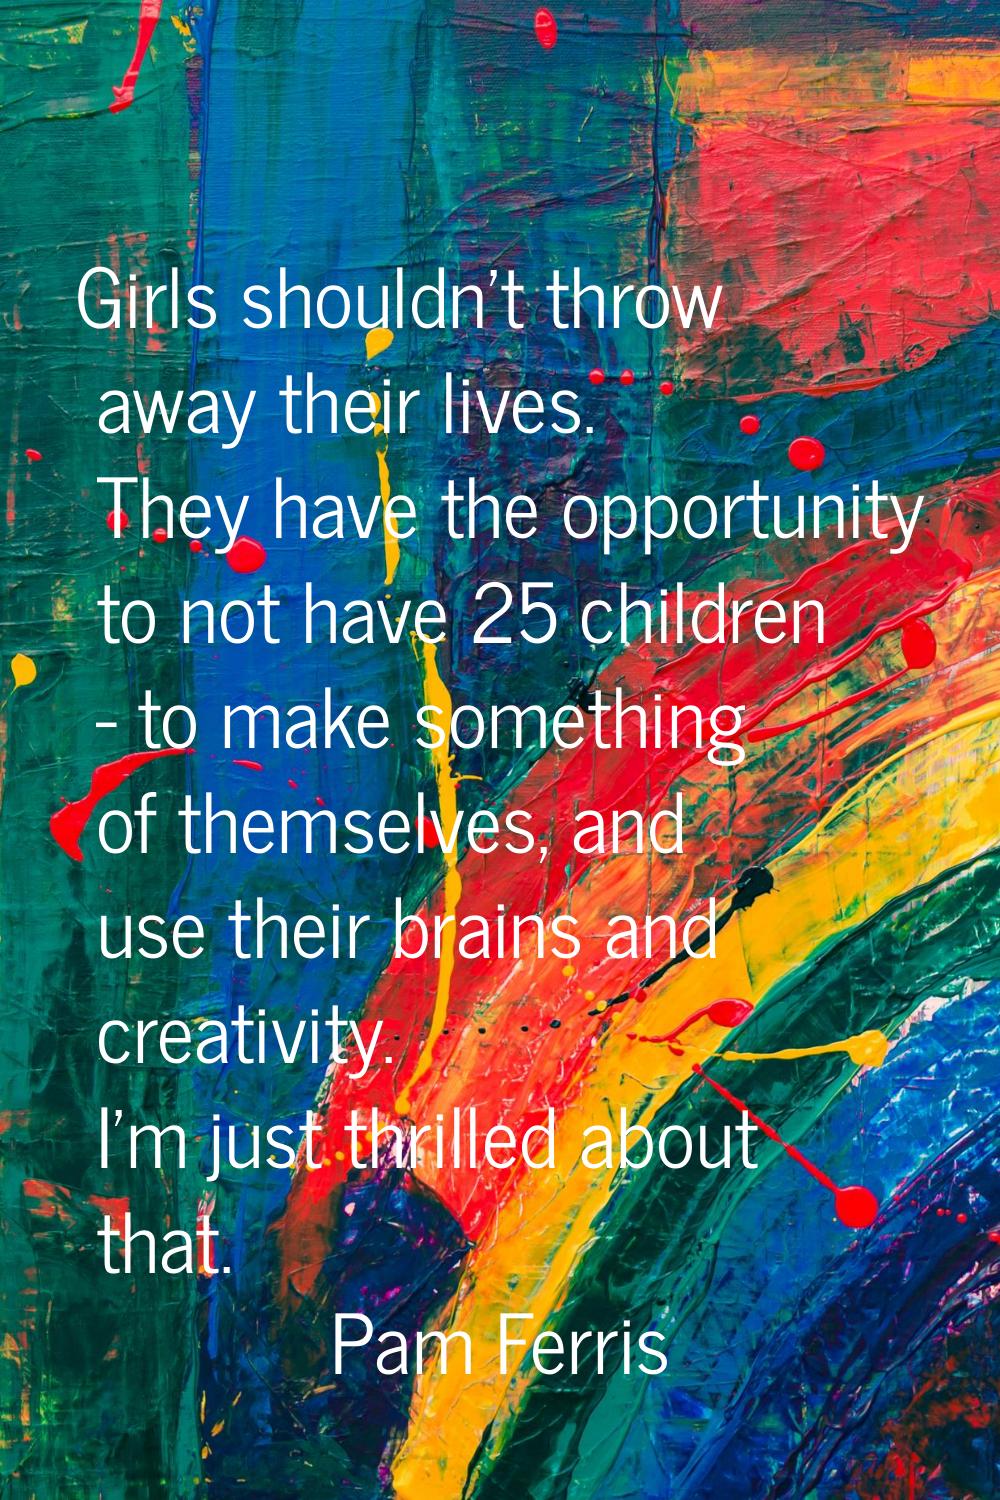 Girls shouldn't throw away their lives. They have the opportunity to not have 25 children - to make